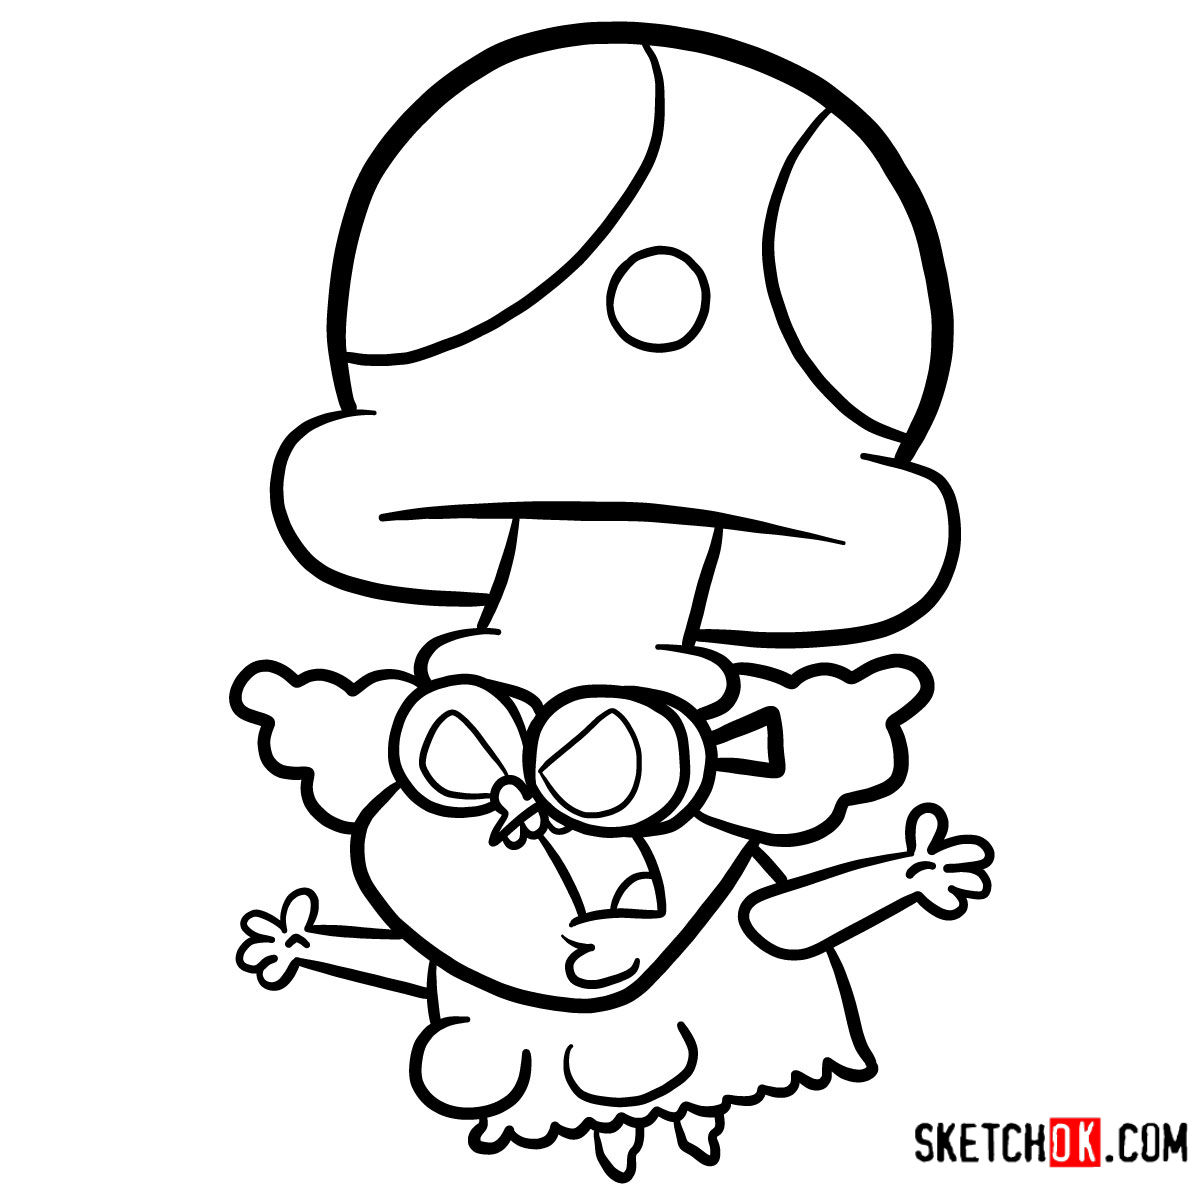 How to draw Truffles from Chowder